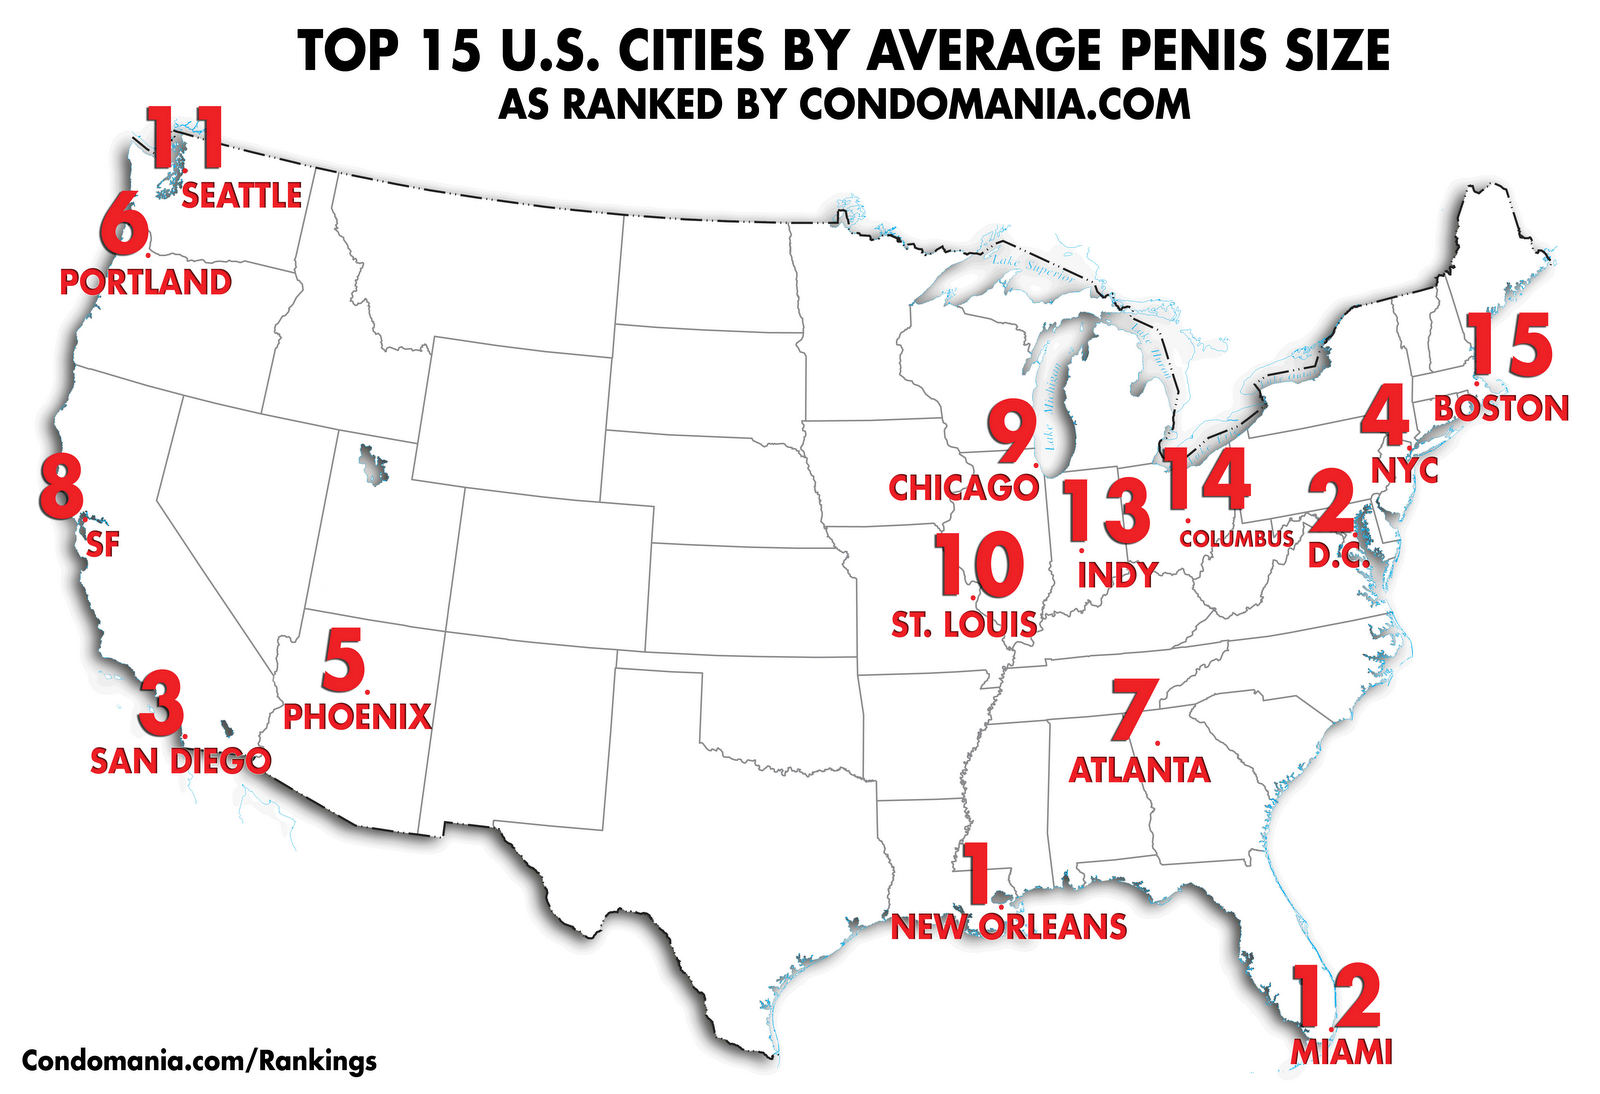 In Case You're Wondering, Here's Where The Men With The Biggest Penises Live